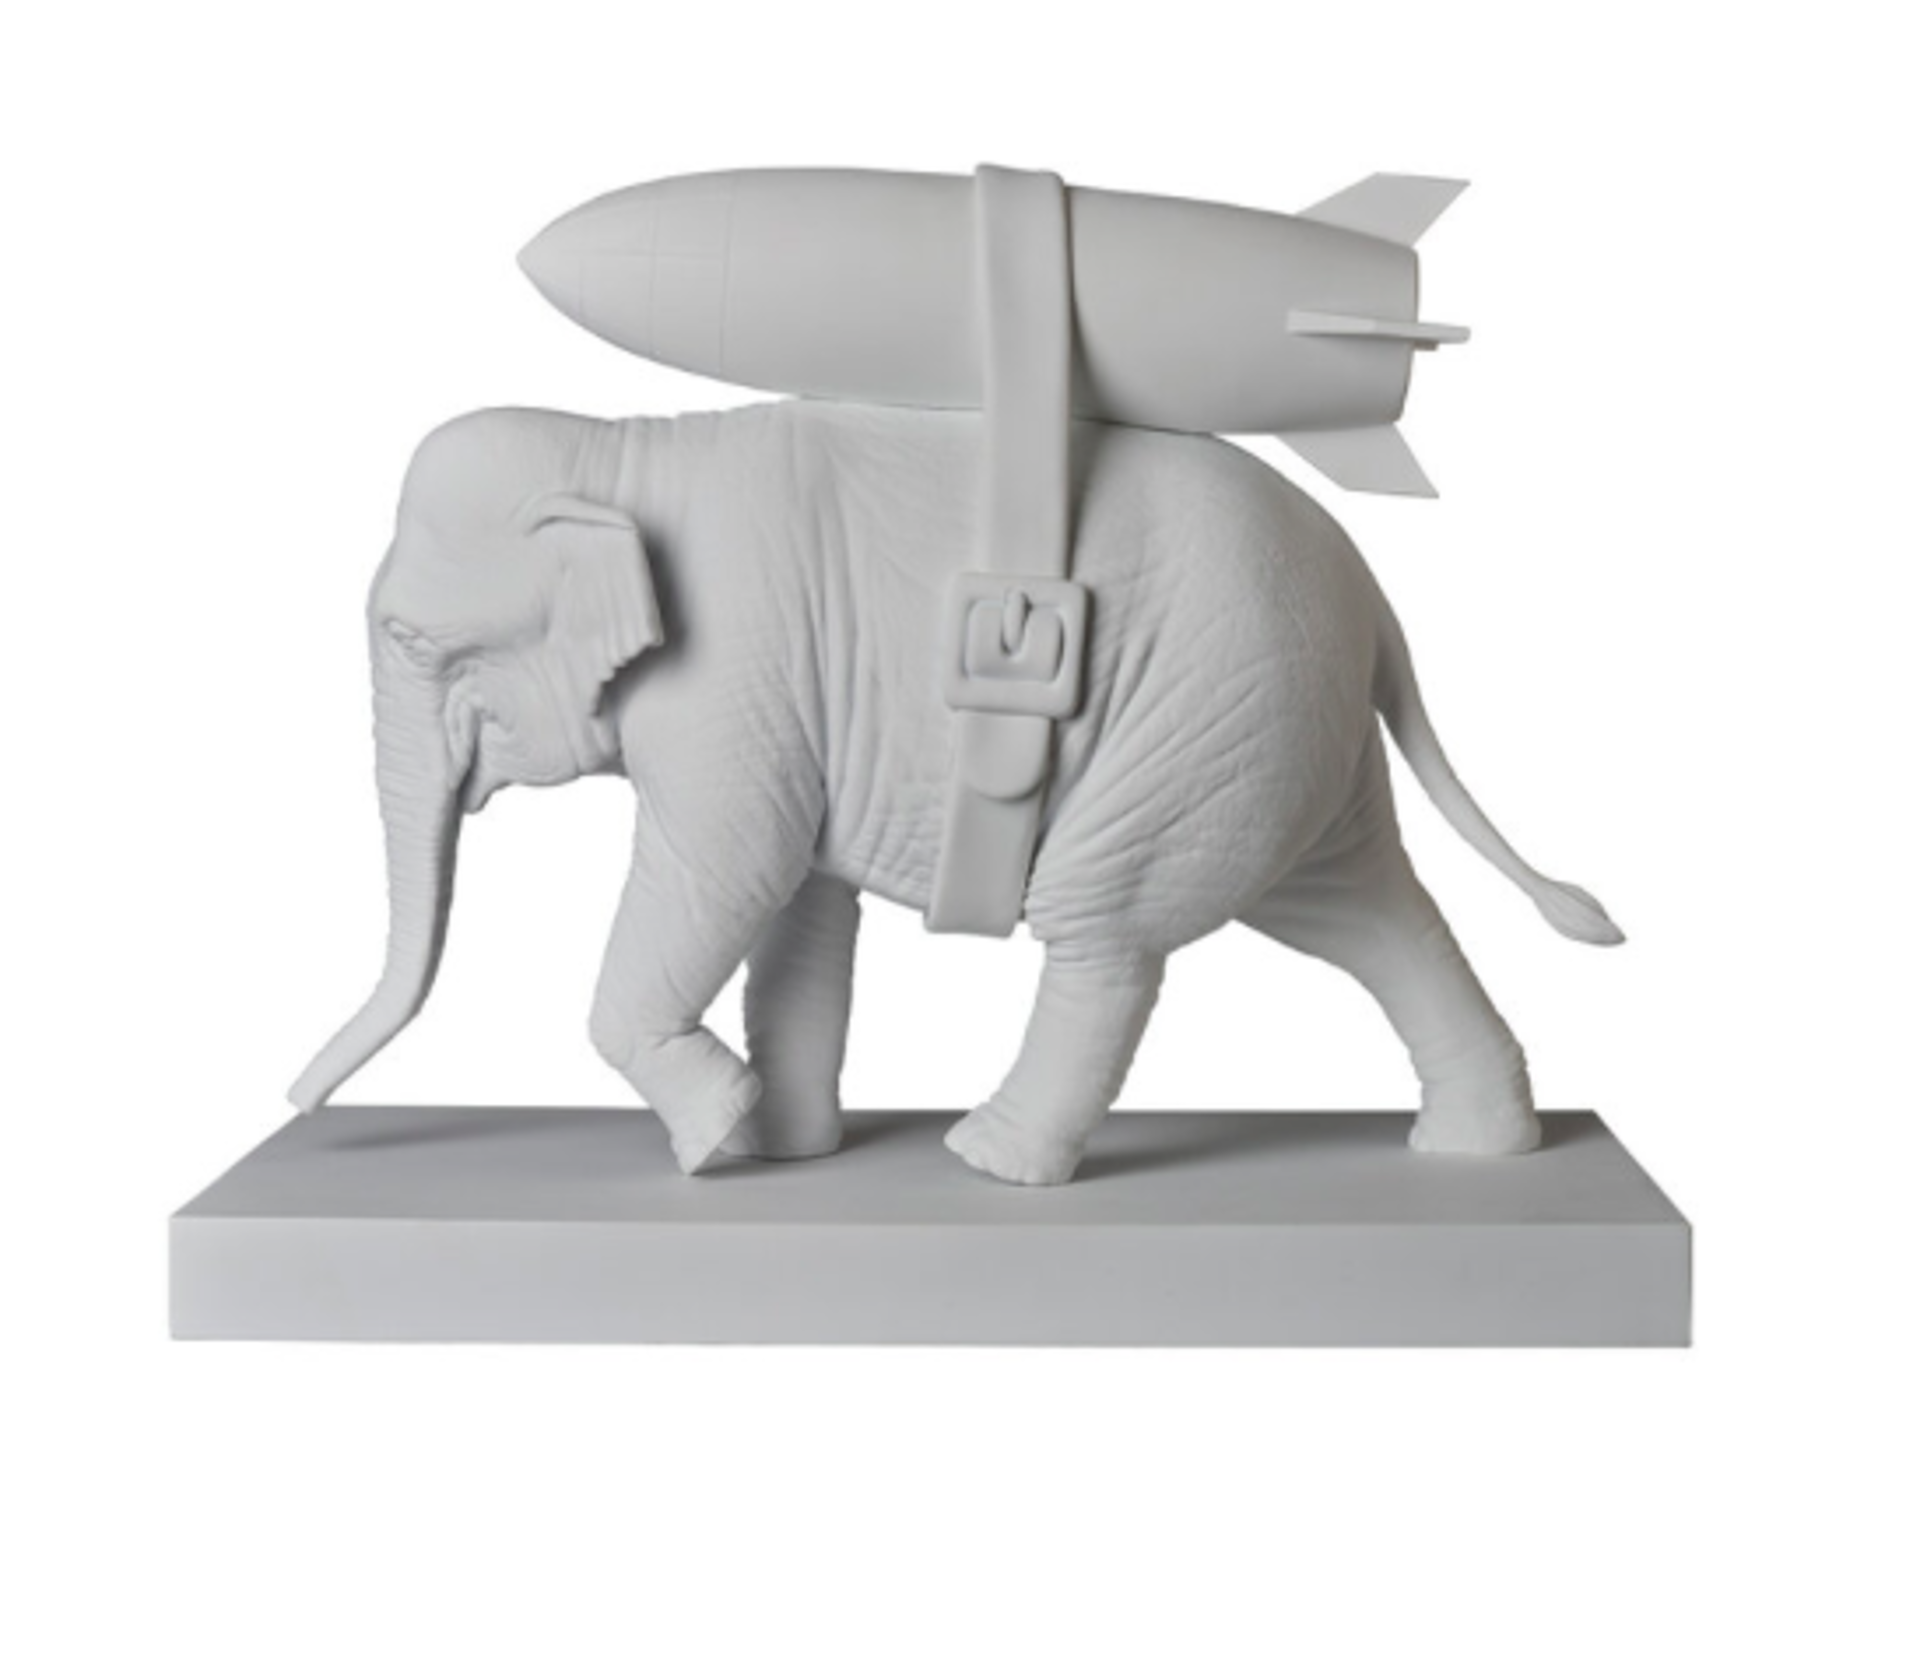 Elephant Sculpture-White by Banksy